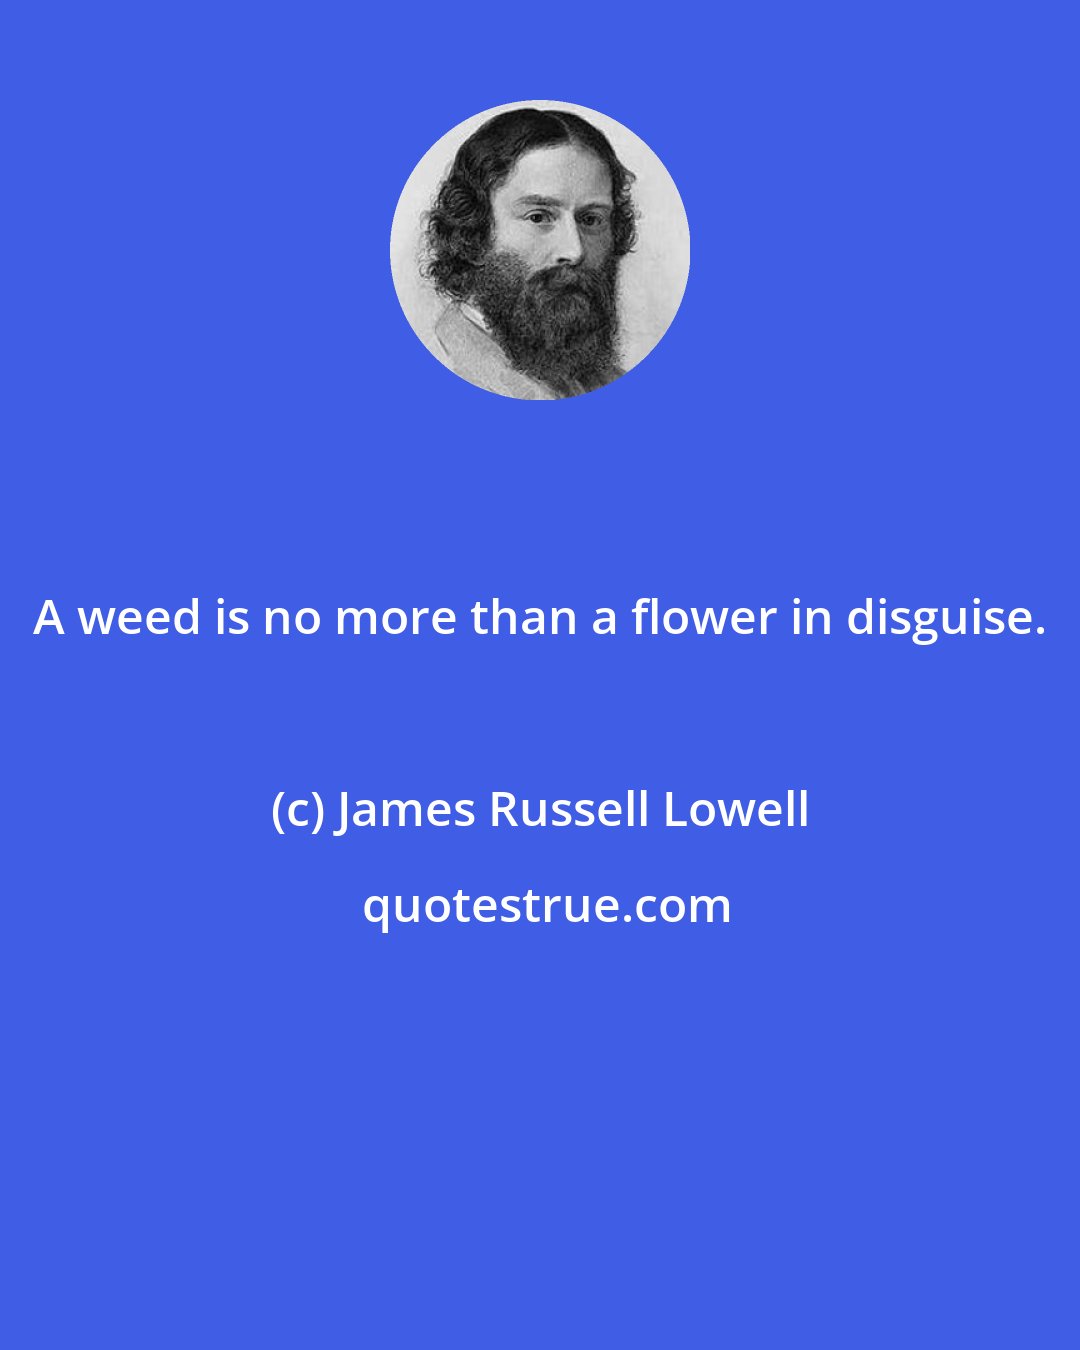 James Russell Lowell: A weed is no more than a flower in disguise.